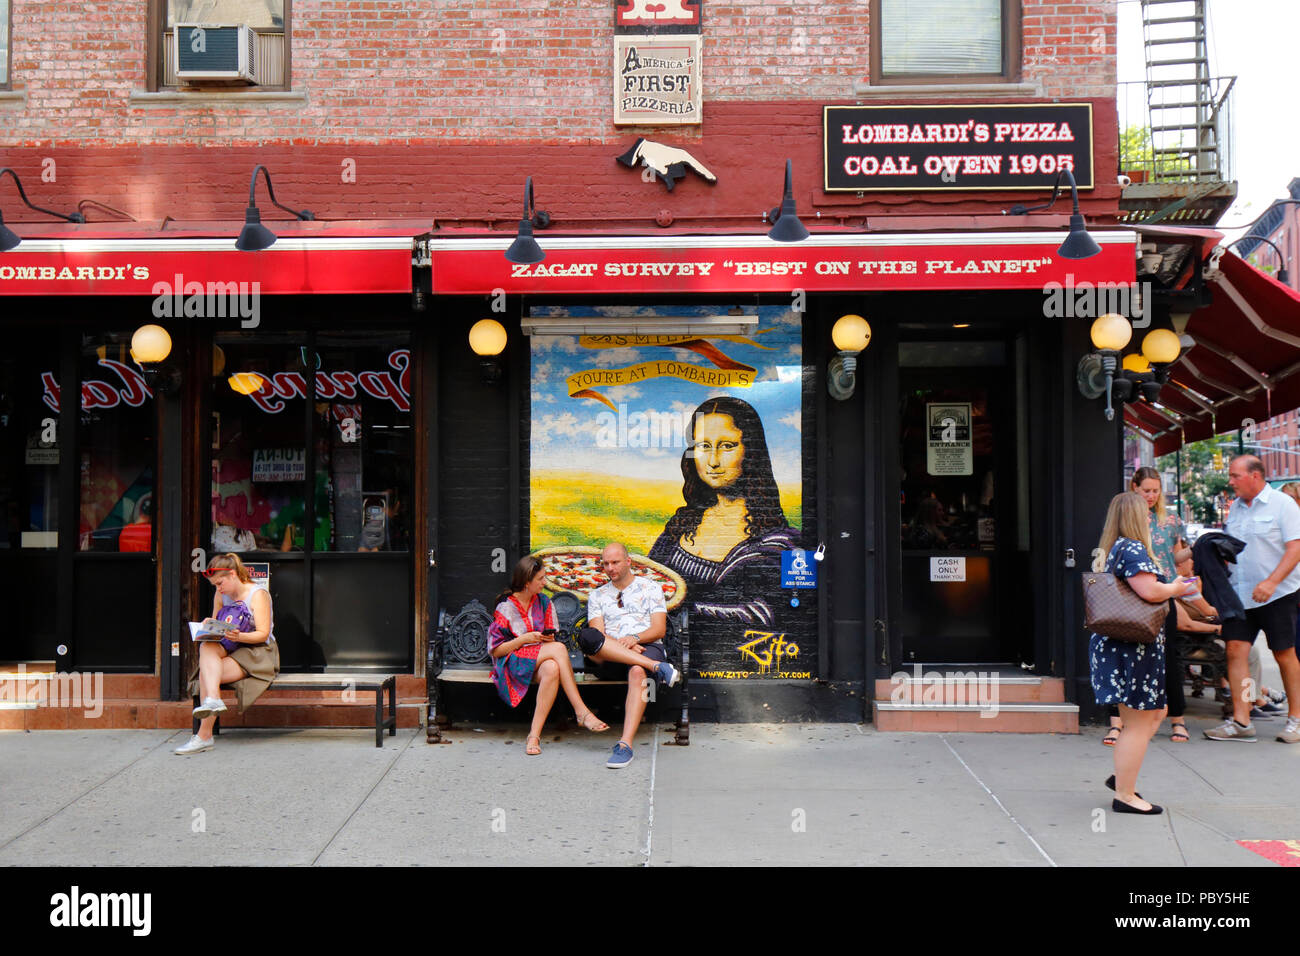 Lombardi's, 32 Spring St, New York, NY. exterior storefront of a pizzeria with a Mona Lisa parody in Manhattan's Little Italy, Nolita neighborhood. Stock Photo